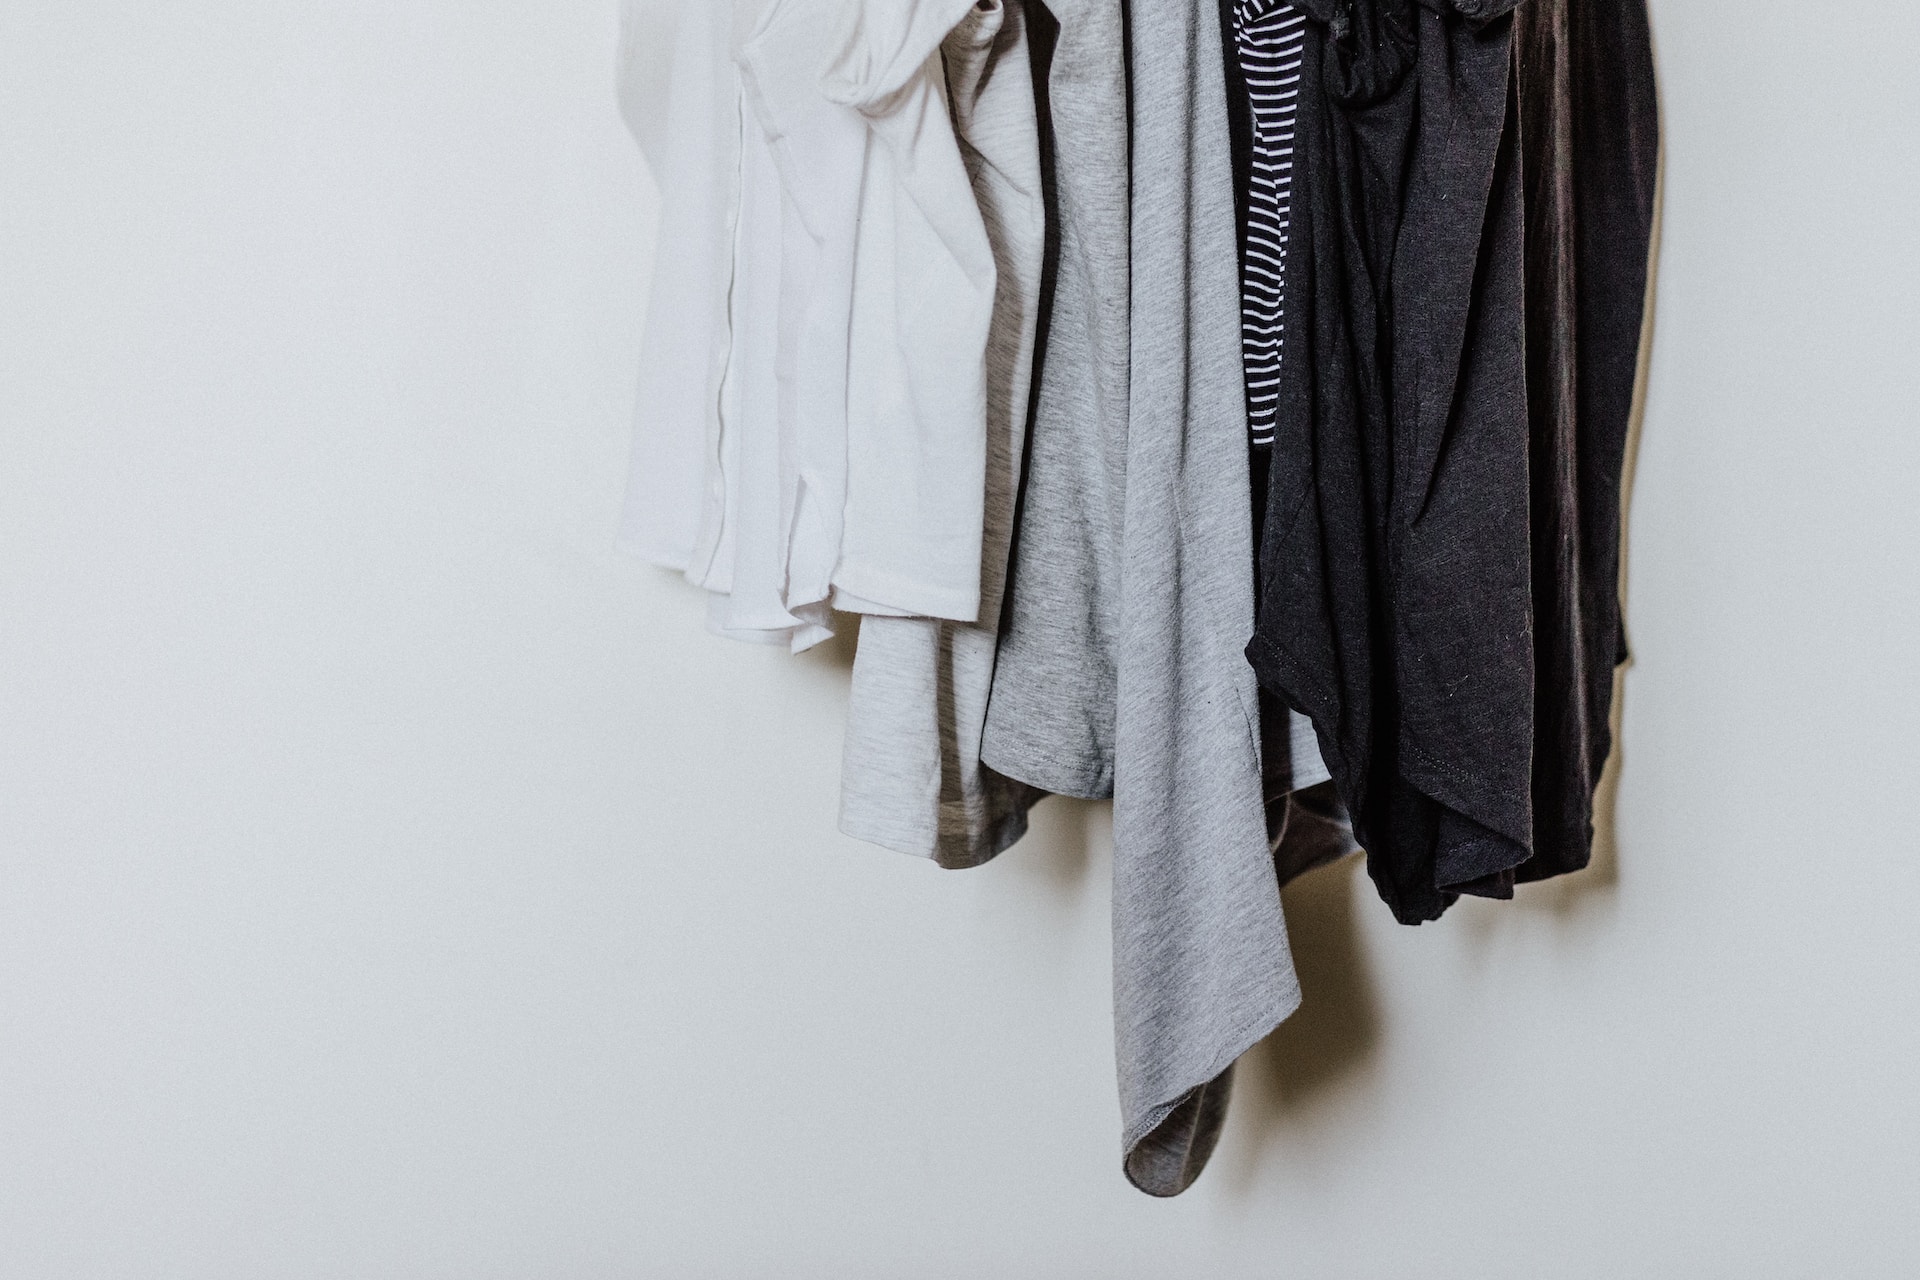 Tips for Selling Your Clothes for Cash